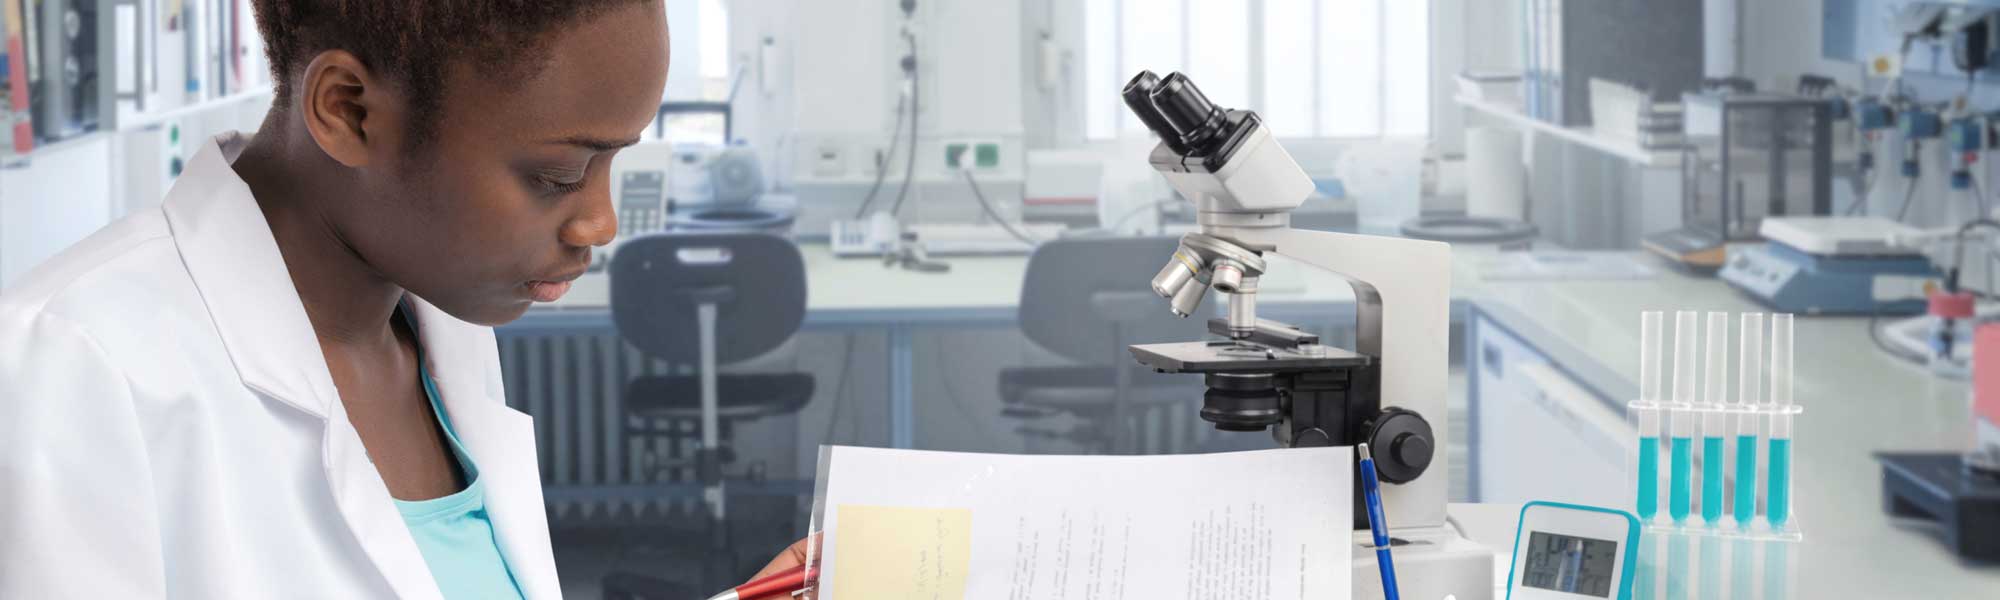 Young woman seated at lab table with microscope